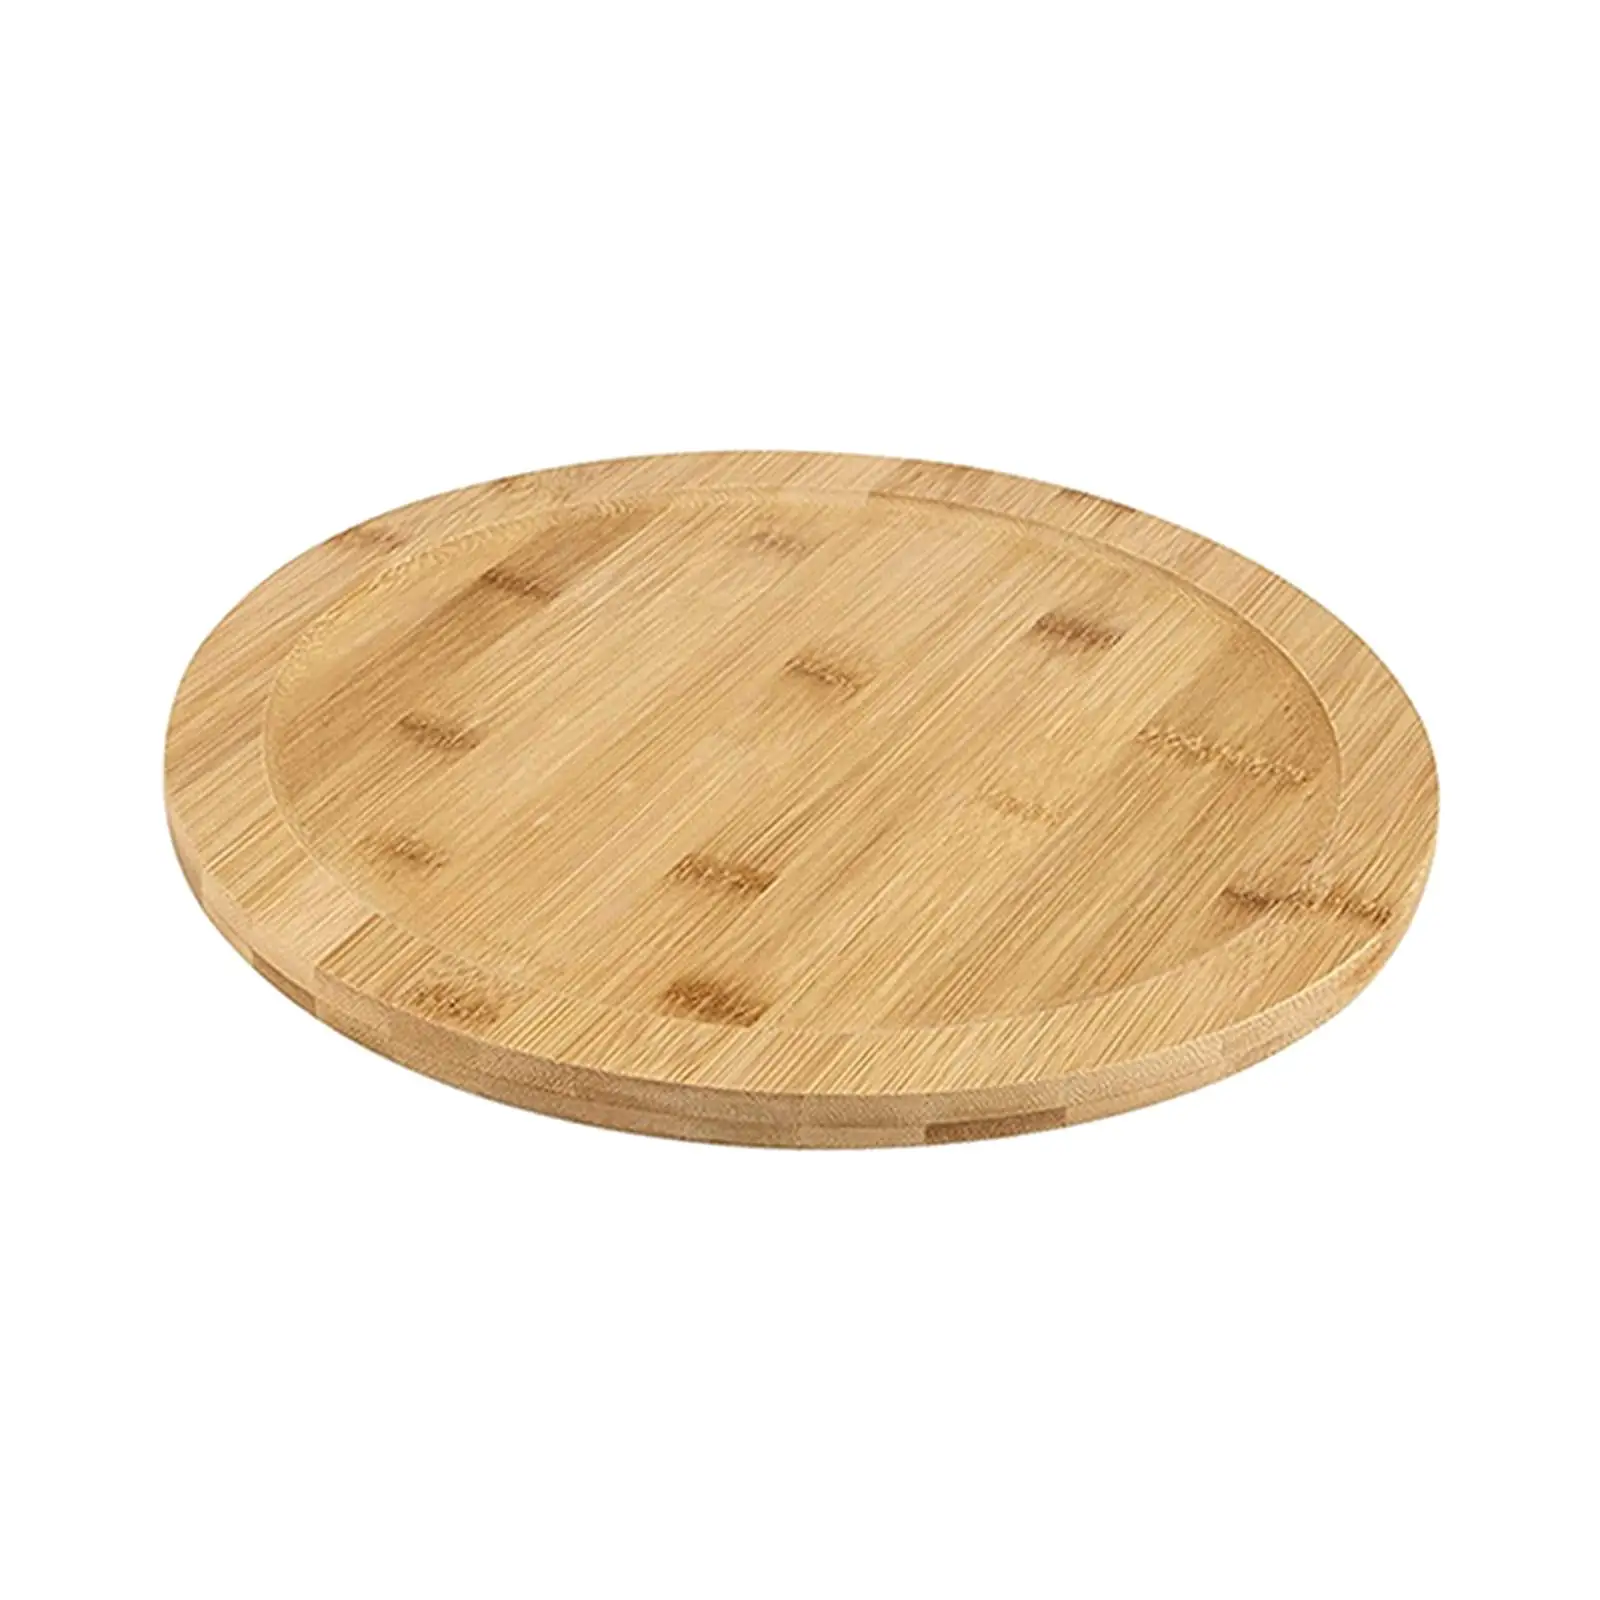 Rotating Base Multipurpose Cake Stand Swivel Plate Serving Plate for Kitchen Countertop Pantry Home Dining Table Cabinet